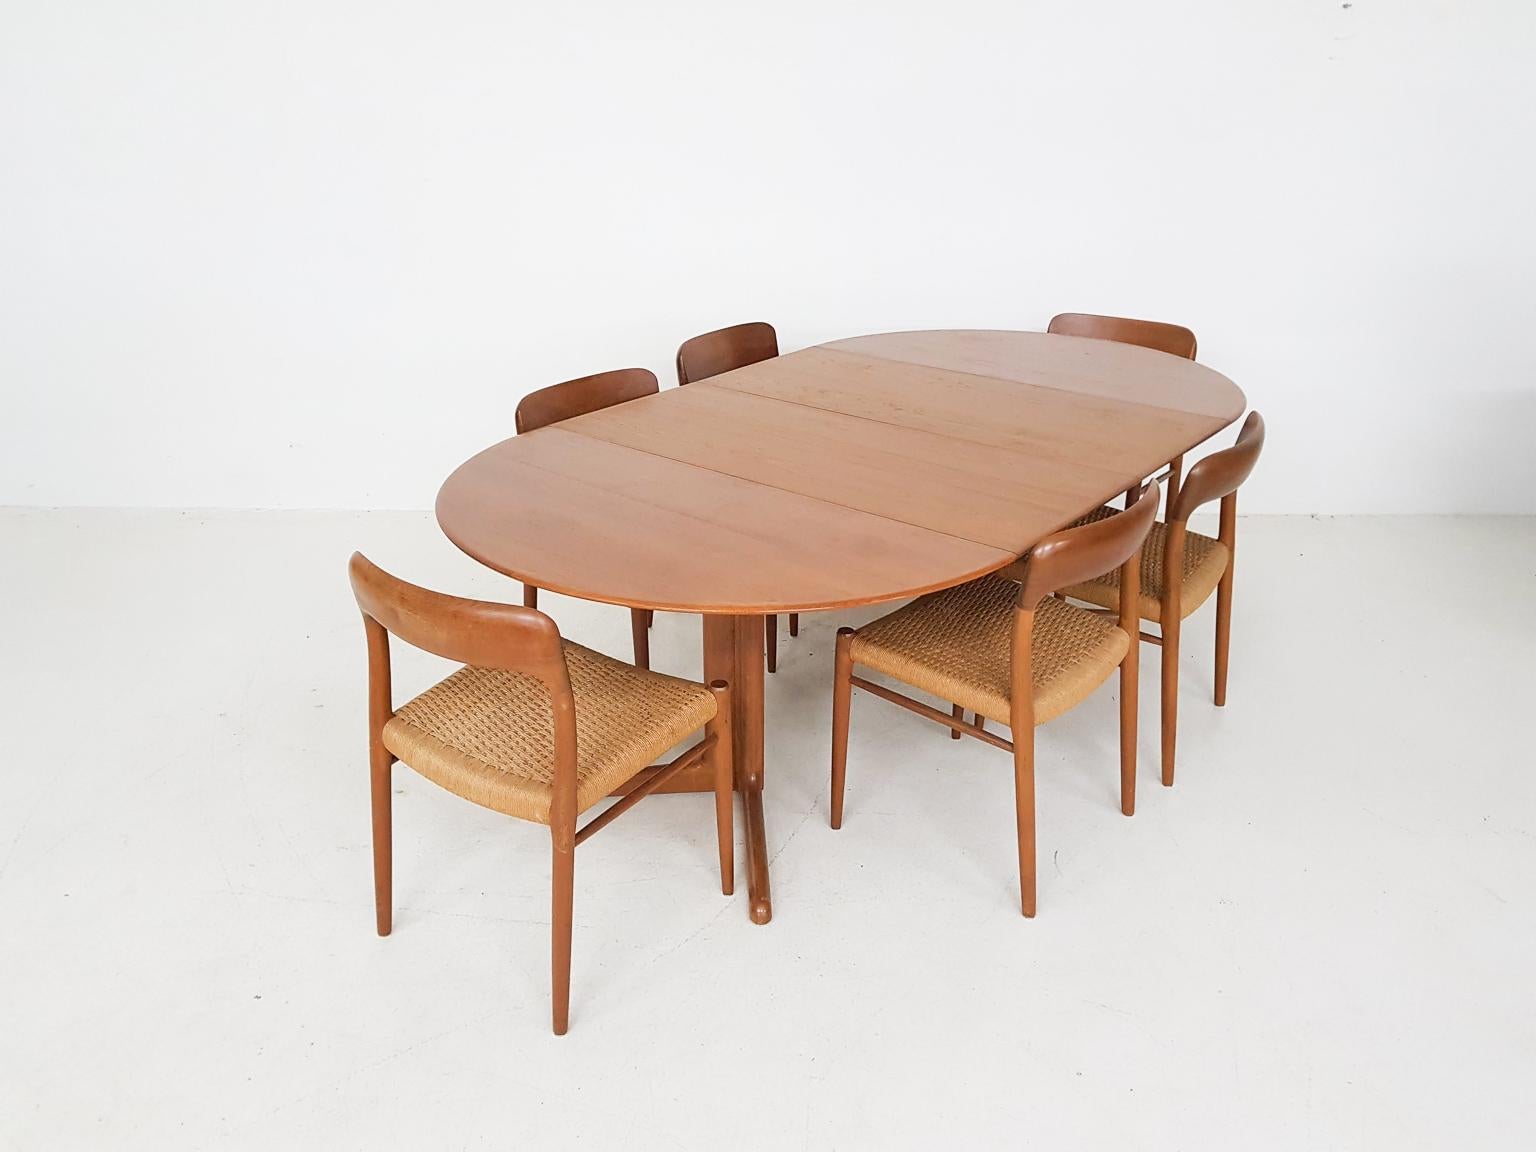 A set of 6 dining chairs and an extendable dining table designed by Niels Otto Møller. This specific model is number 75 and was made in Denmark in the 1950s. An excellent piece of Classic Danish modern furniture design.

The chairs feature a paper